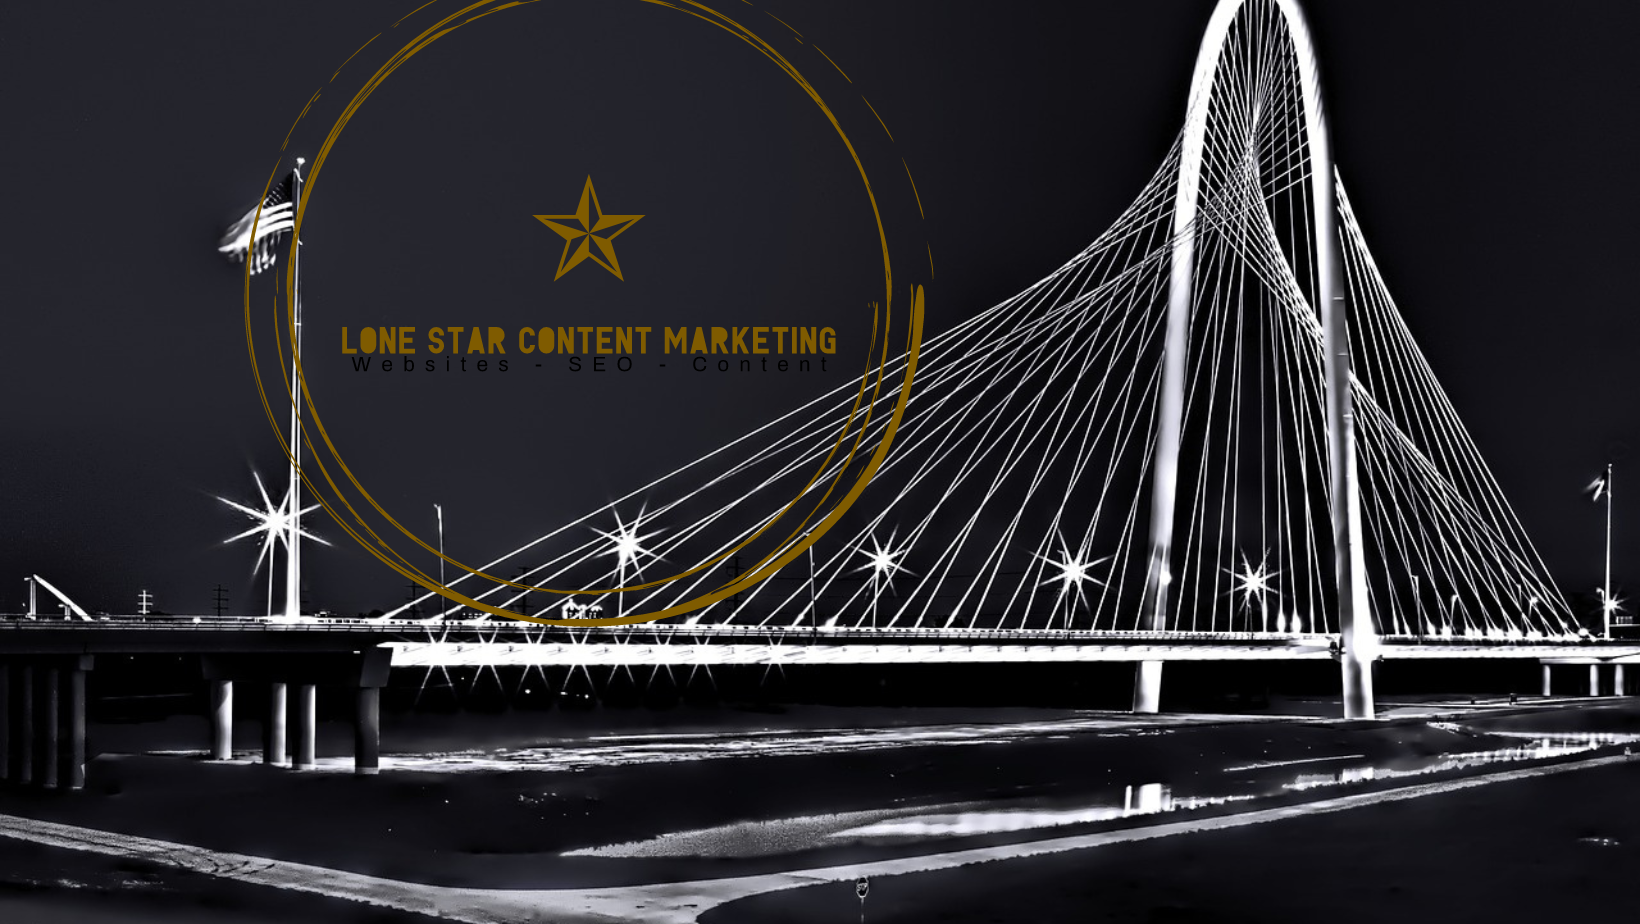 Lone Star Content Marketing - Texas Law Firm & Business Marketing